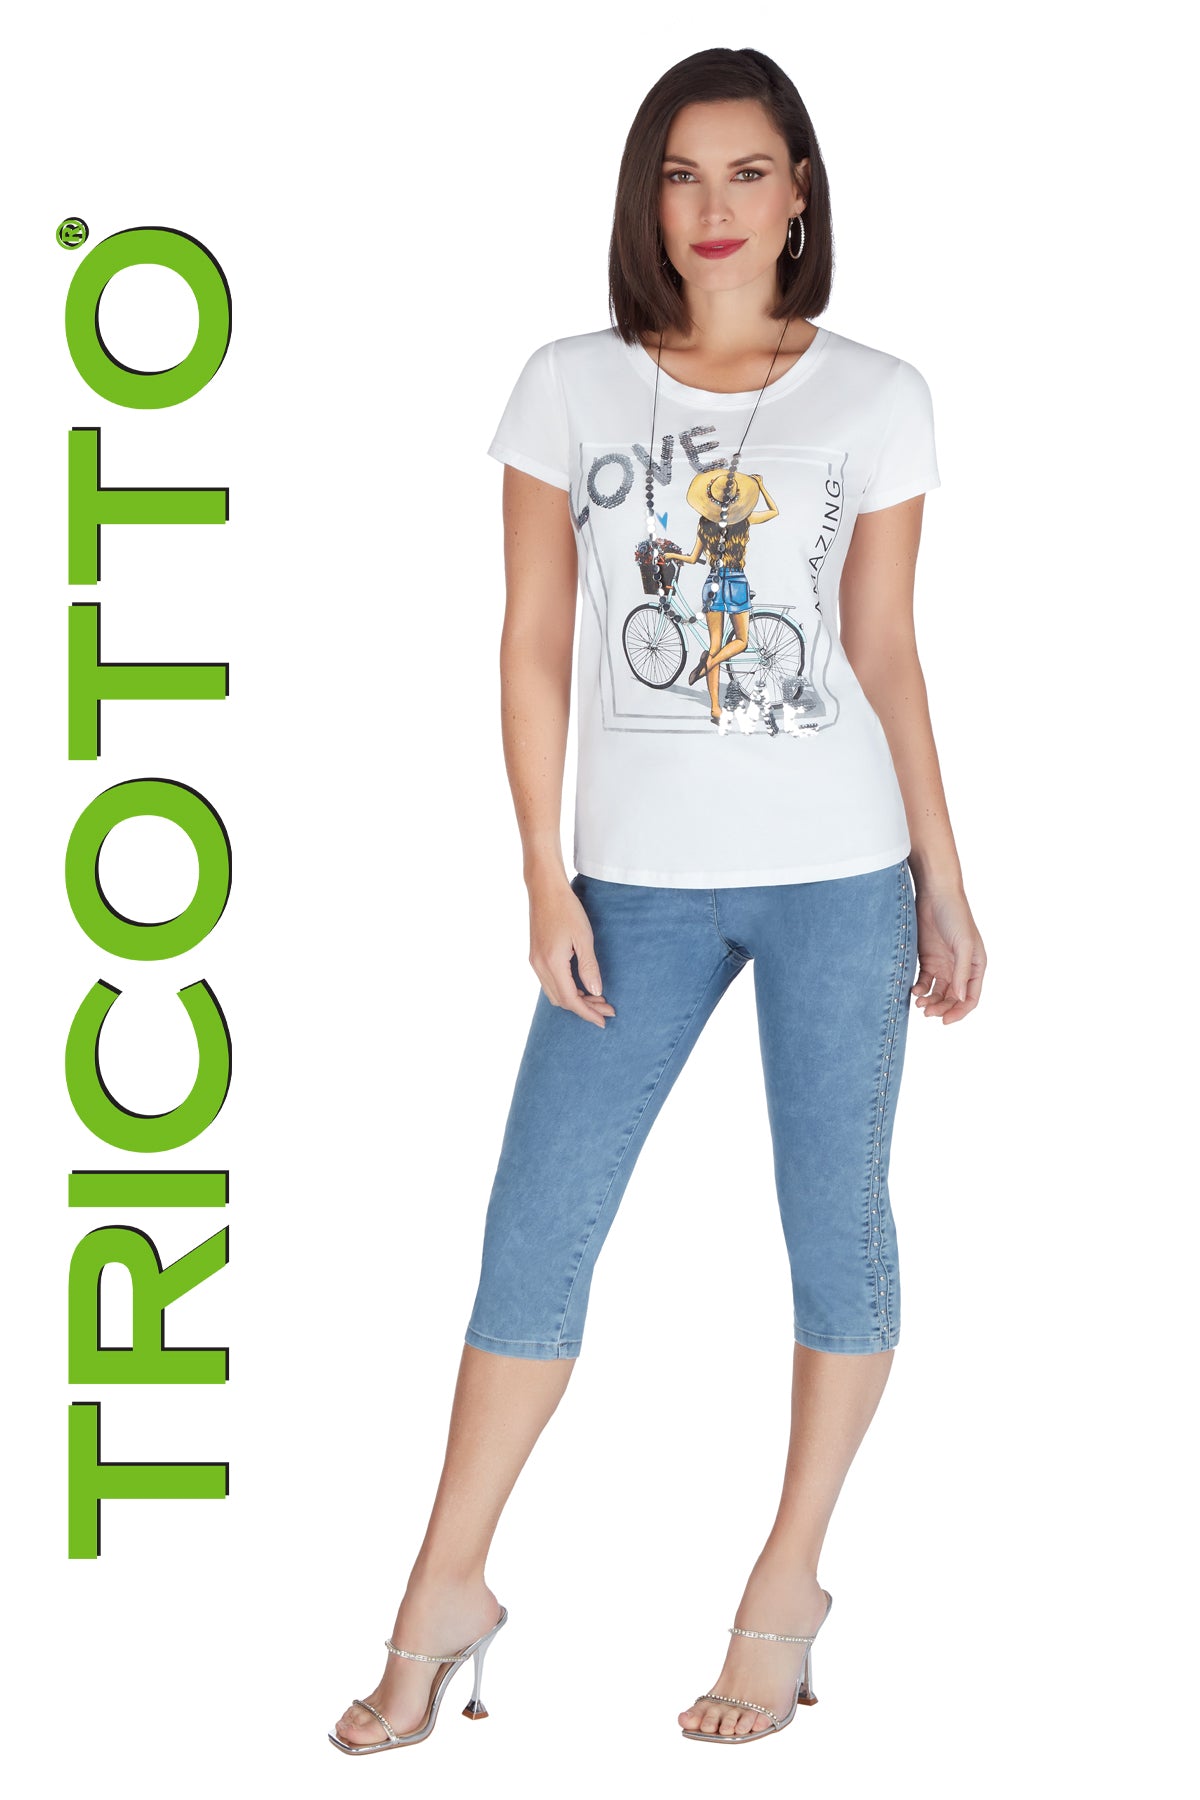 Tricotto Jeans-Tricotto T-shirts-Tricotto Spring 2022-Jane & John Clothing-Tricotto Online Shop-Tricotto Clothing-Tricotto Clothing Quebec